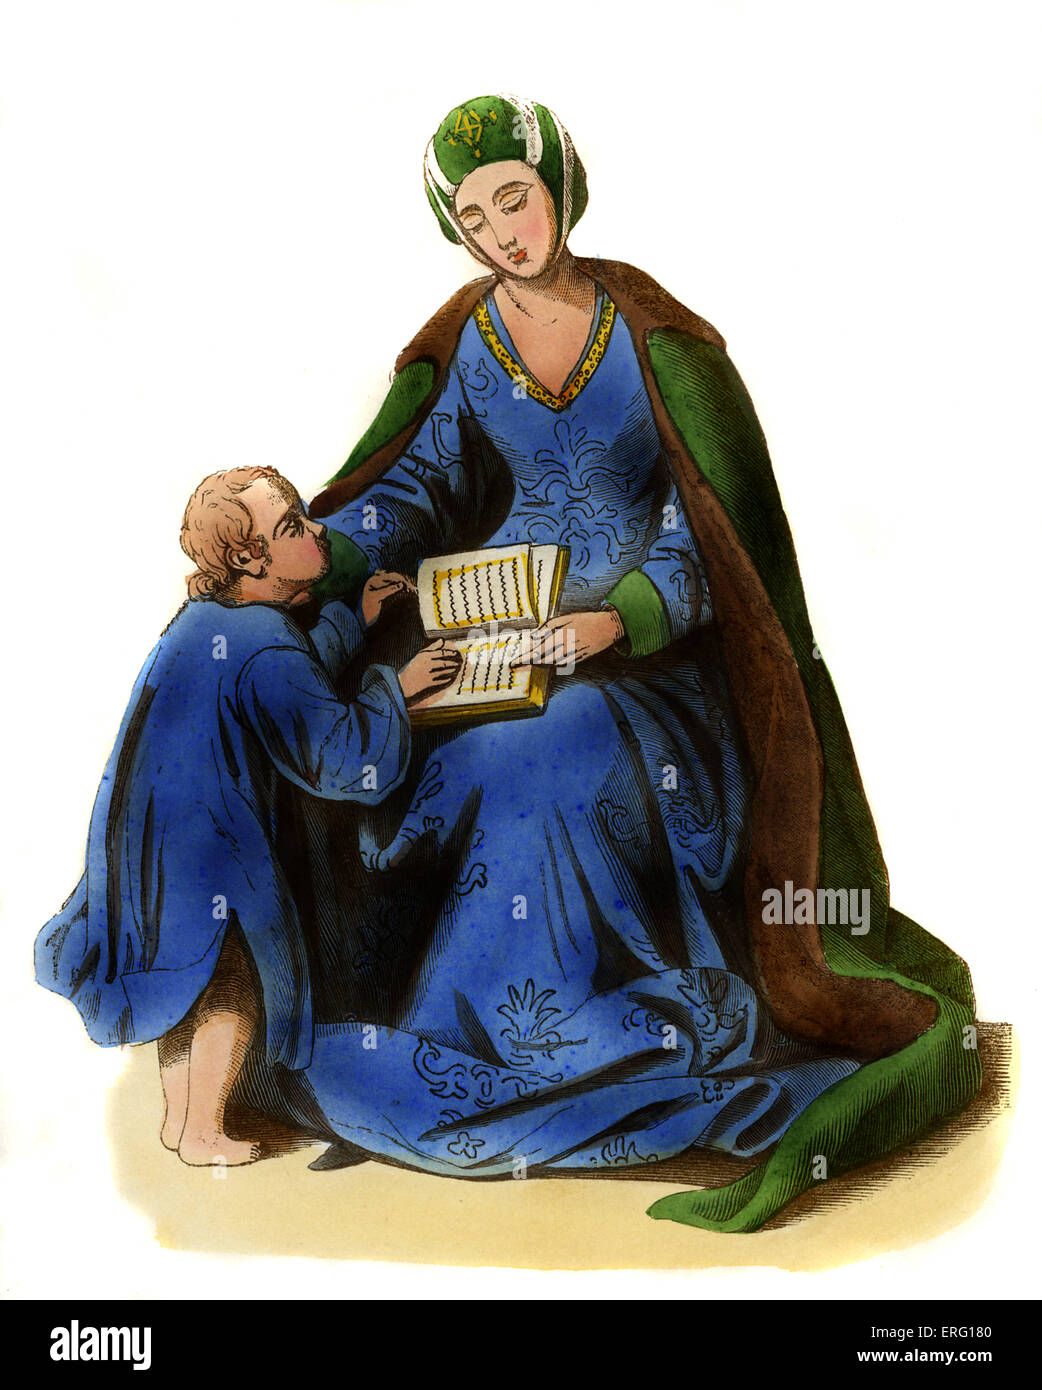 Lady - German costume of the latter half of the 15th century, pictured seated reading to boy. She is wearing a blue embroidered Stock Photo